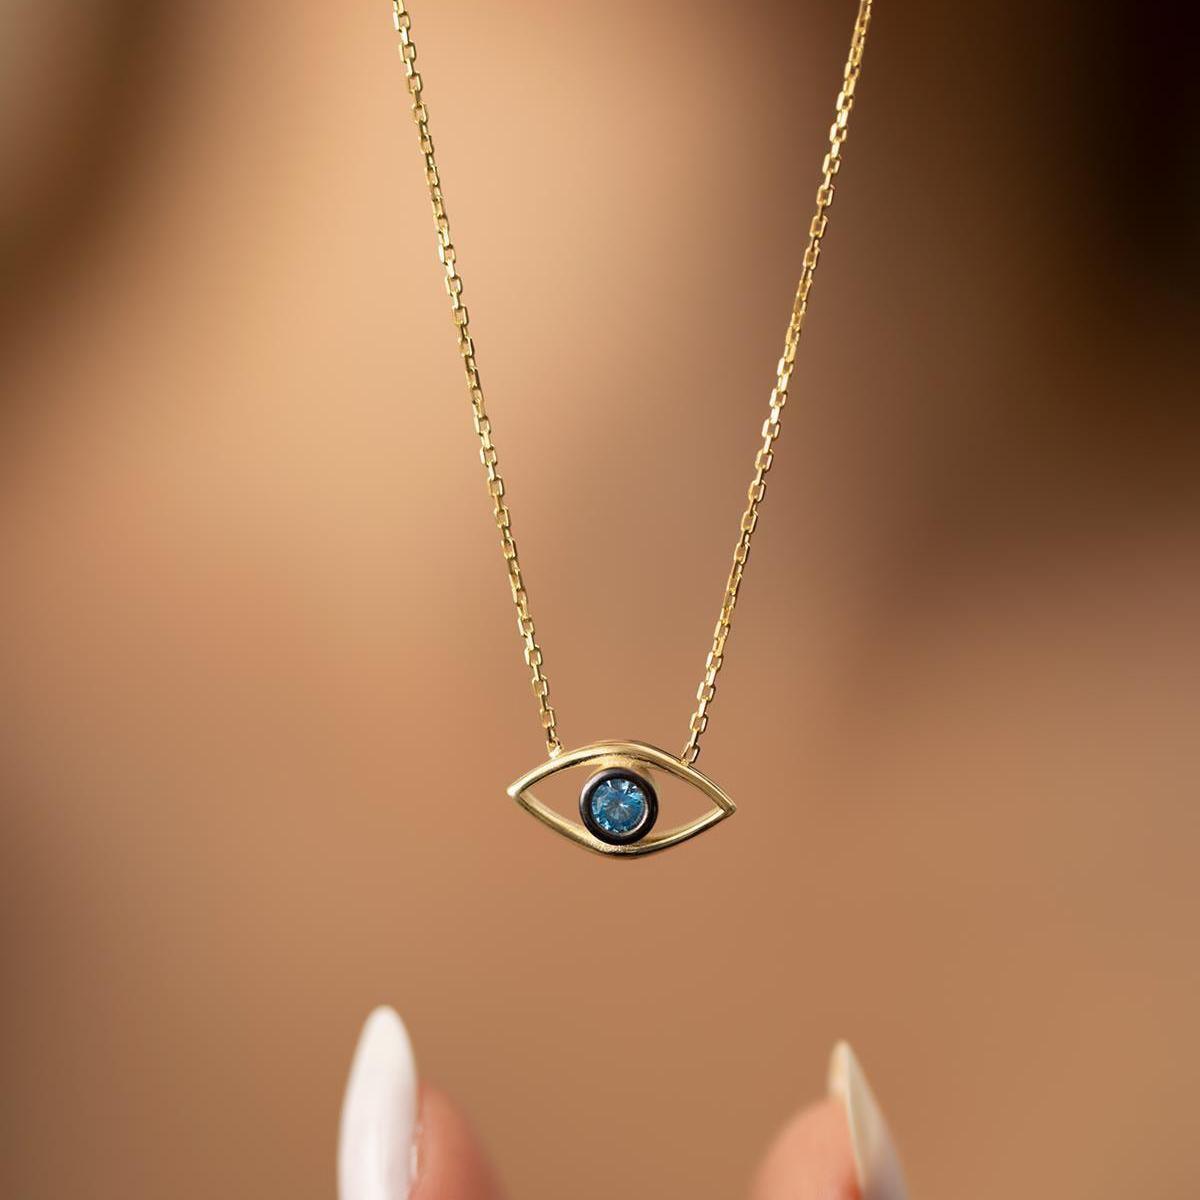 Eye Of Horus Necklace • Evil Eye Necklace Gold • Eye Necklace Silver - Trending Silver Gifts